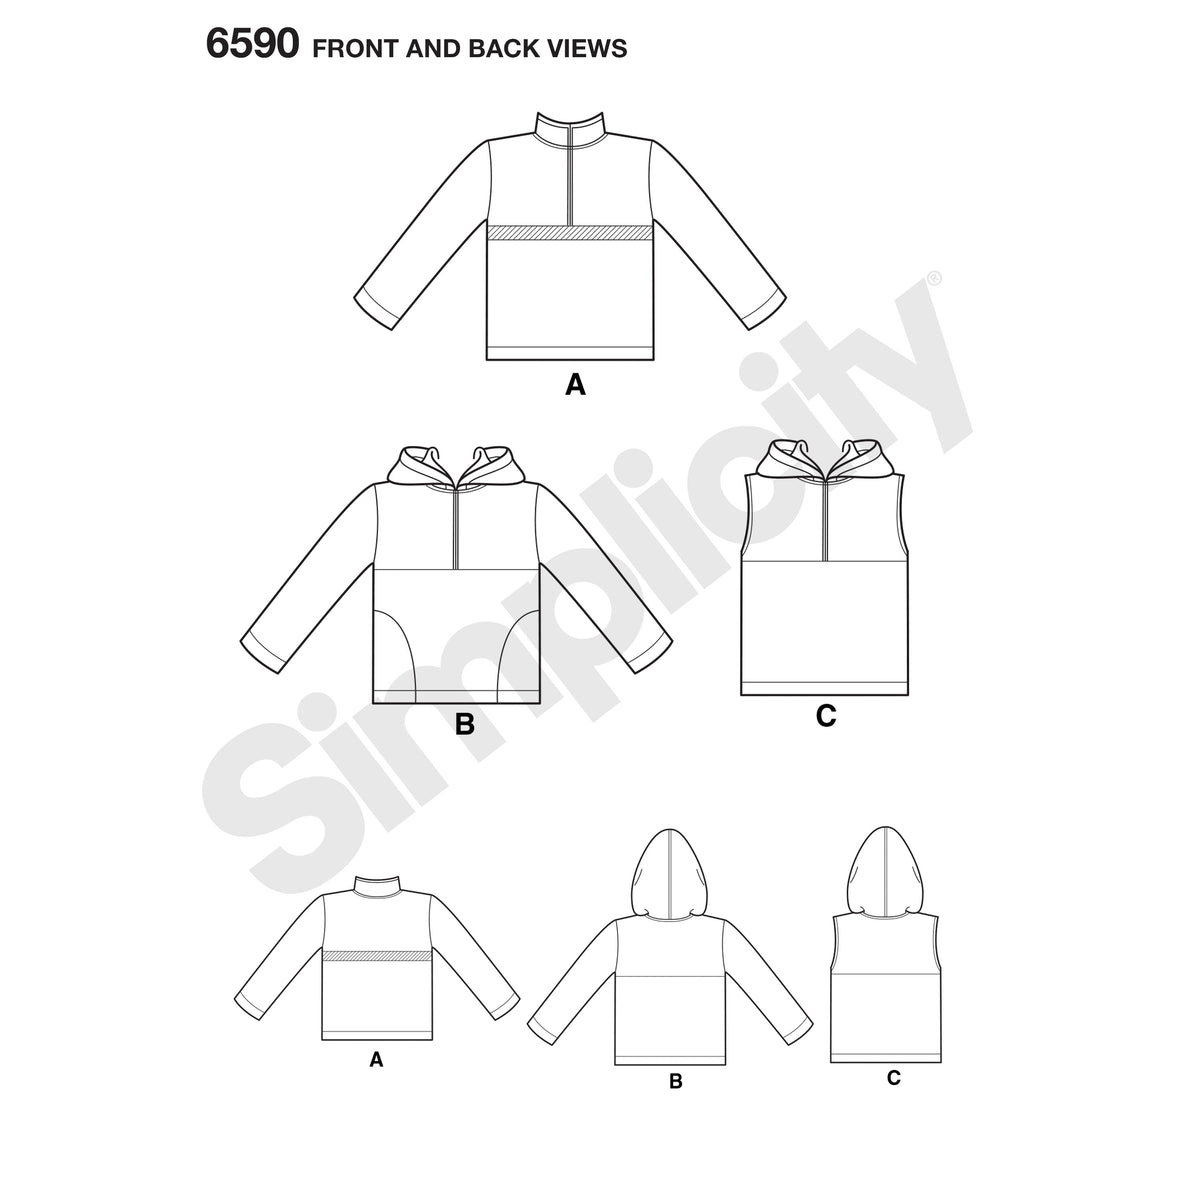 6590 New Look Pattern 6590 Child's Pullover Vest or Top